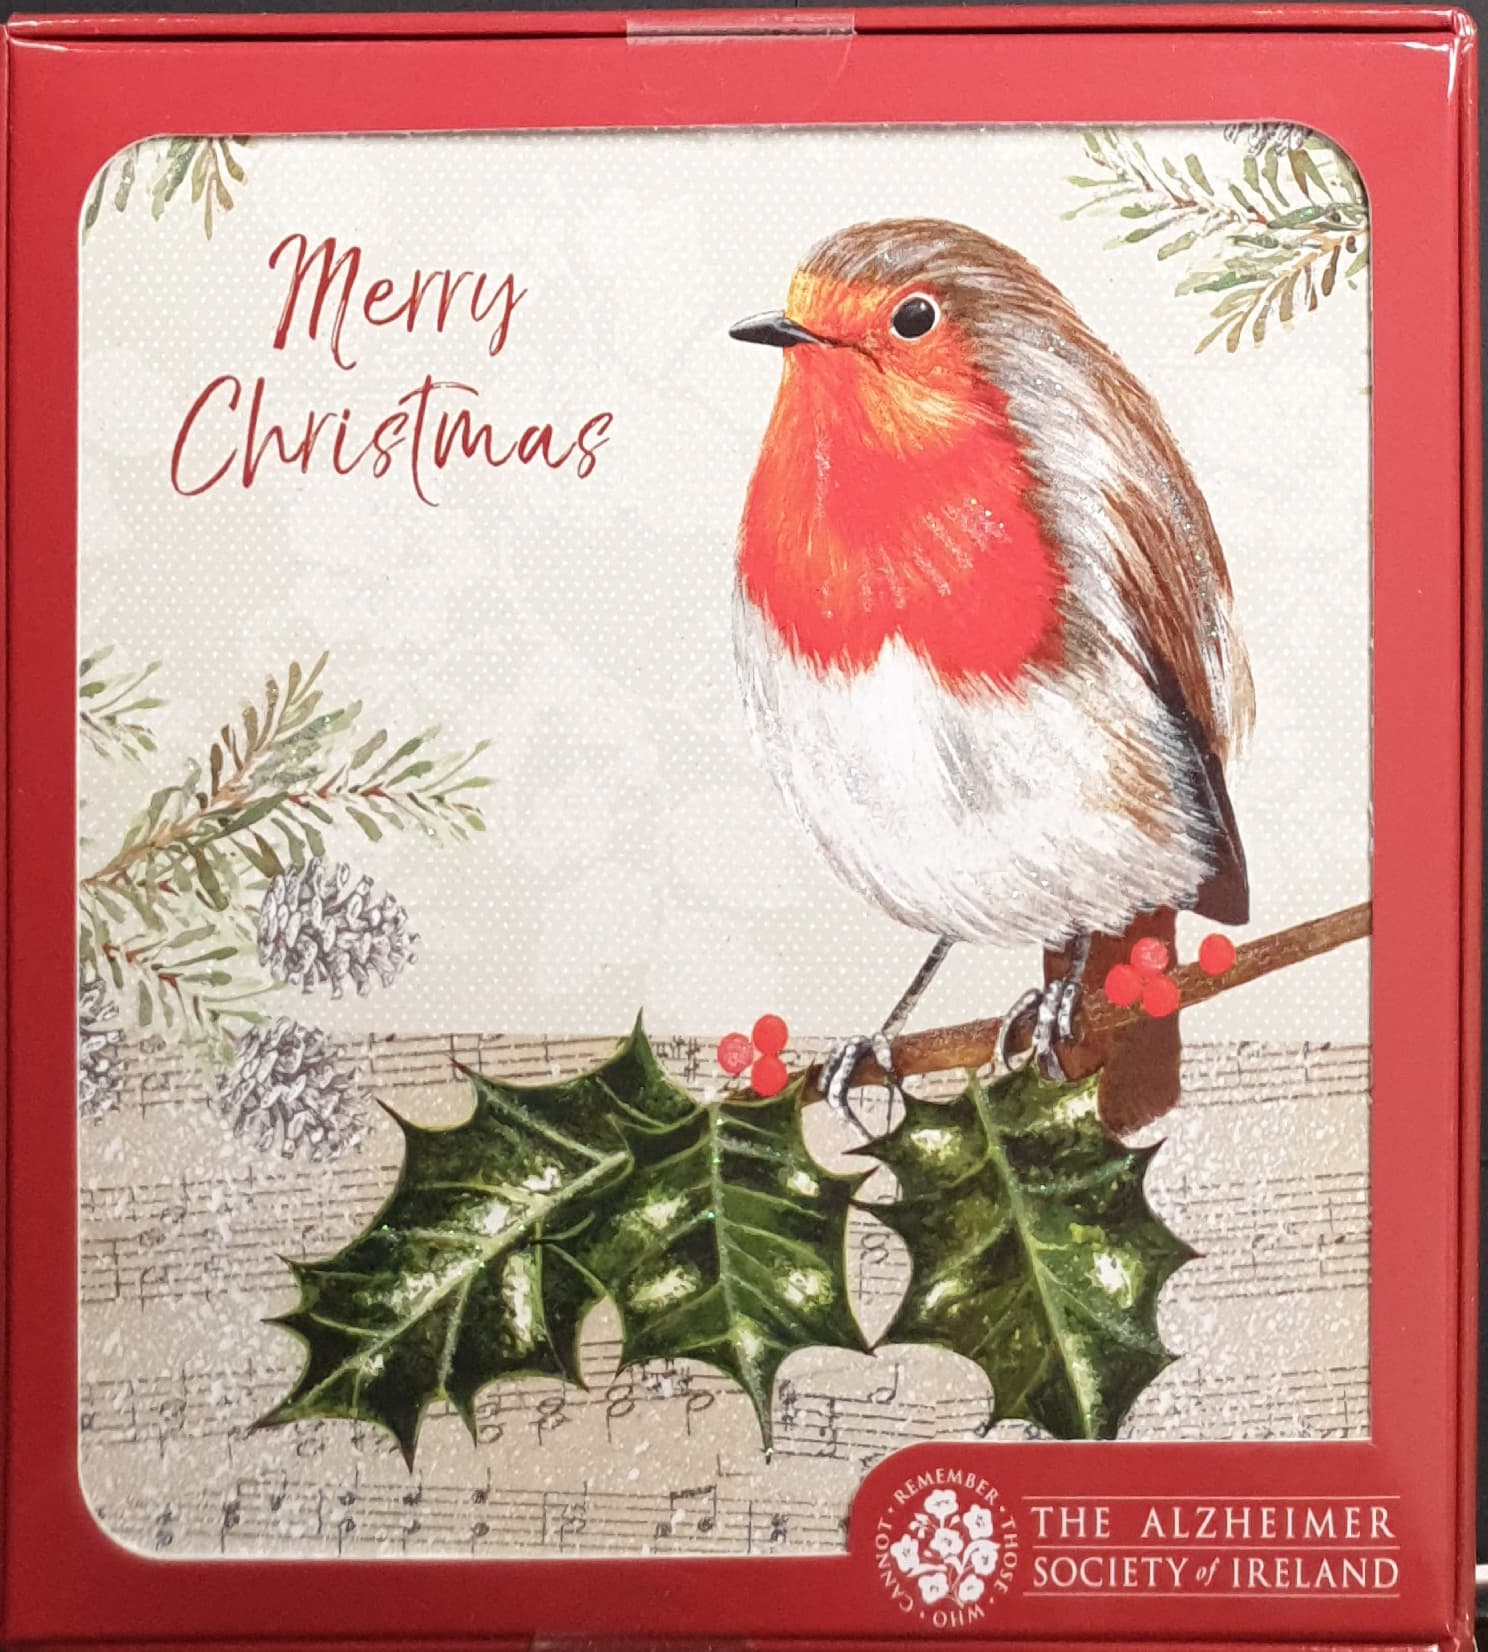 Charity Christmas Card (In Irish & English) - Box of 16 / Alzheimer Society of Ireland - Robin Perched on Holly Branch